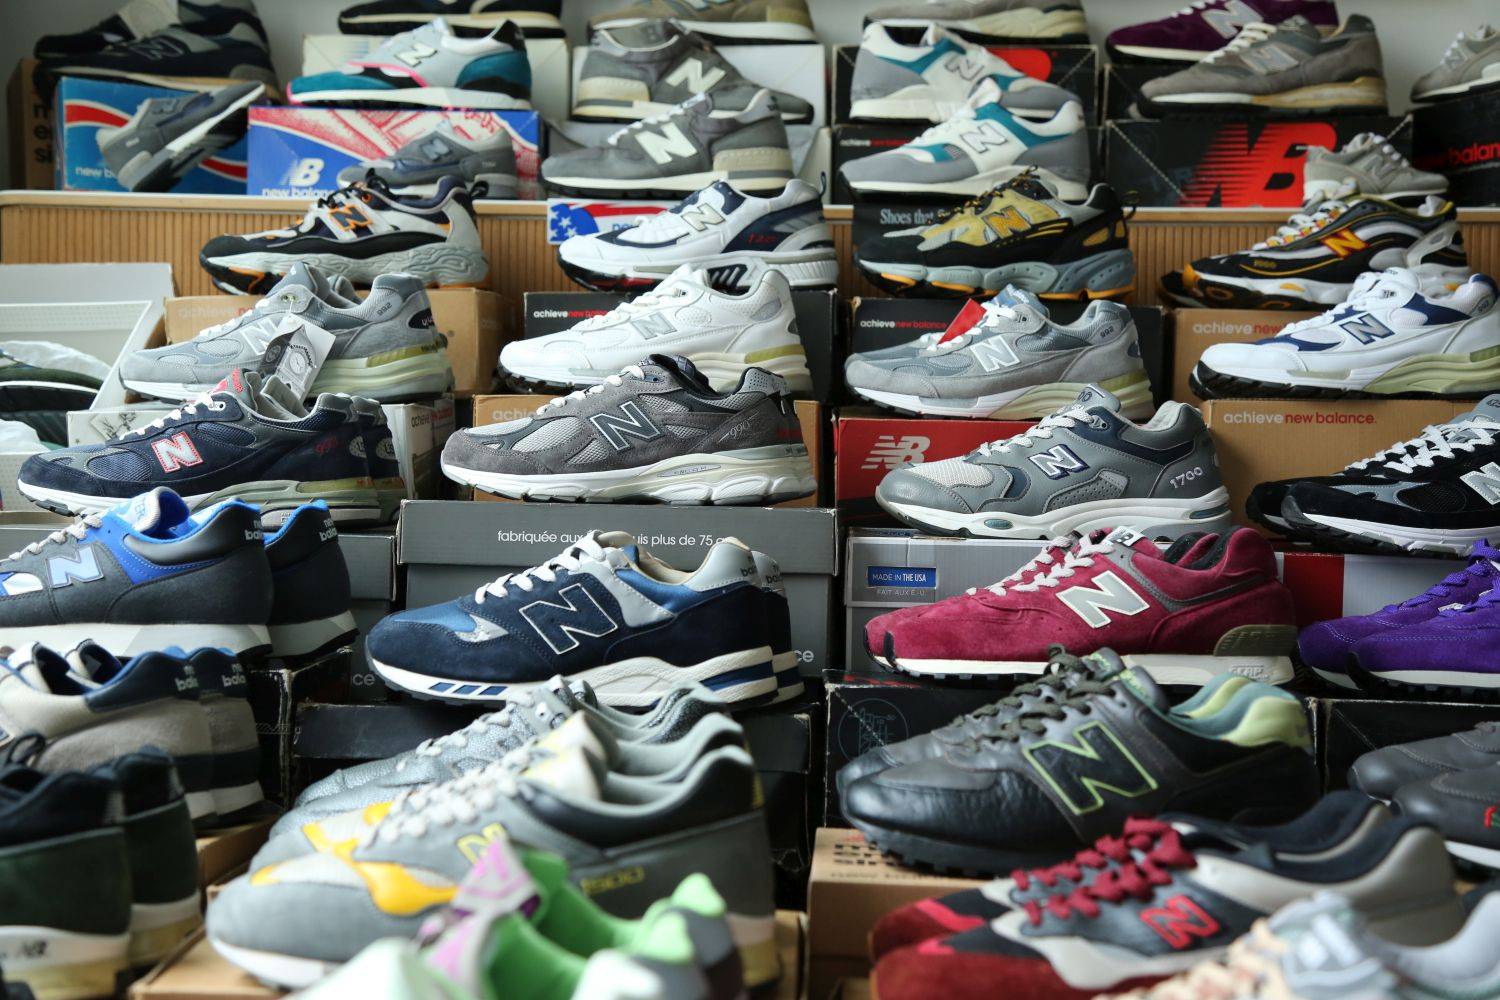 Thomas Dartiques' collection of new balance 2